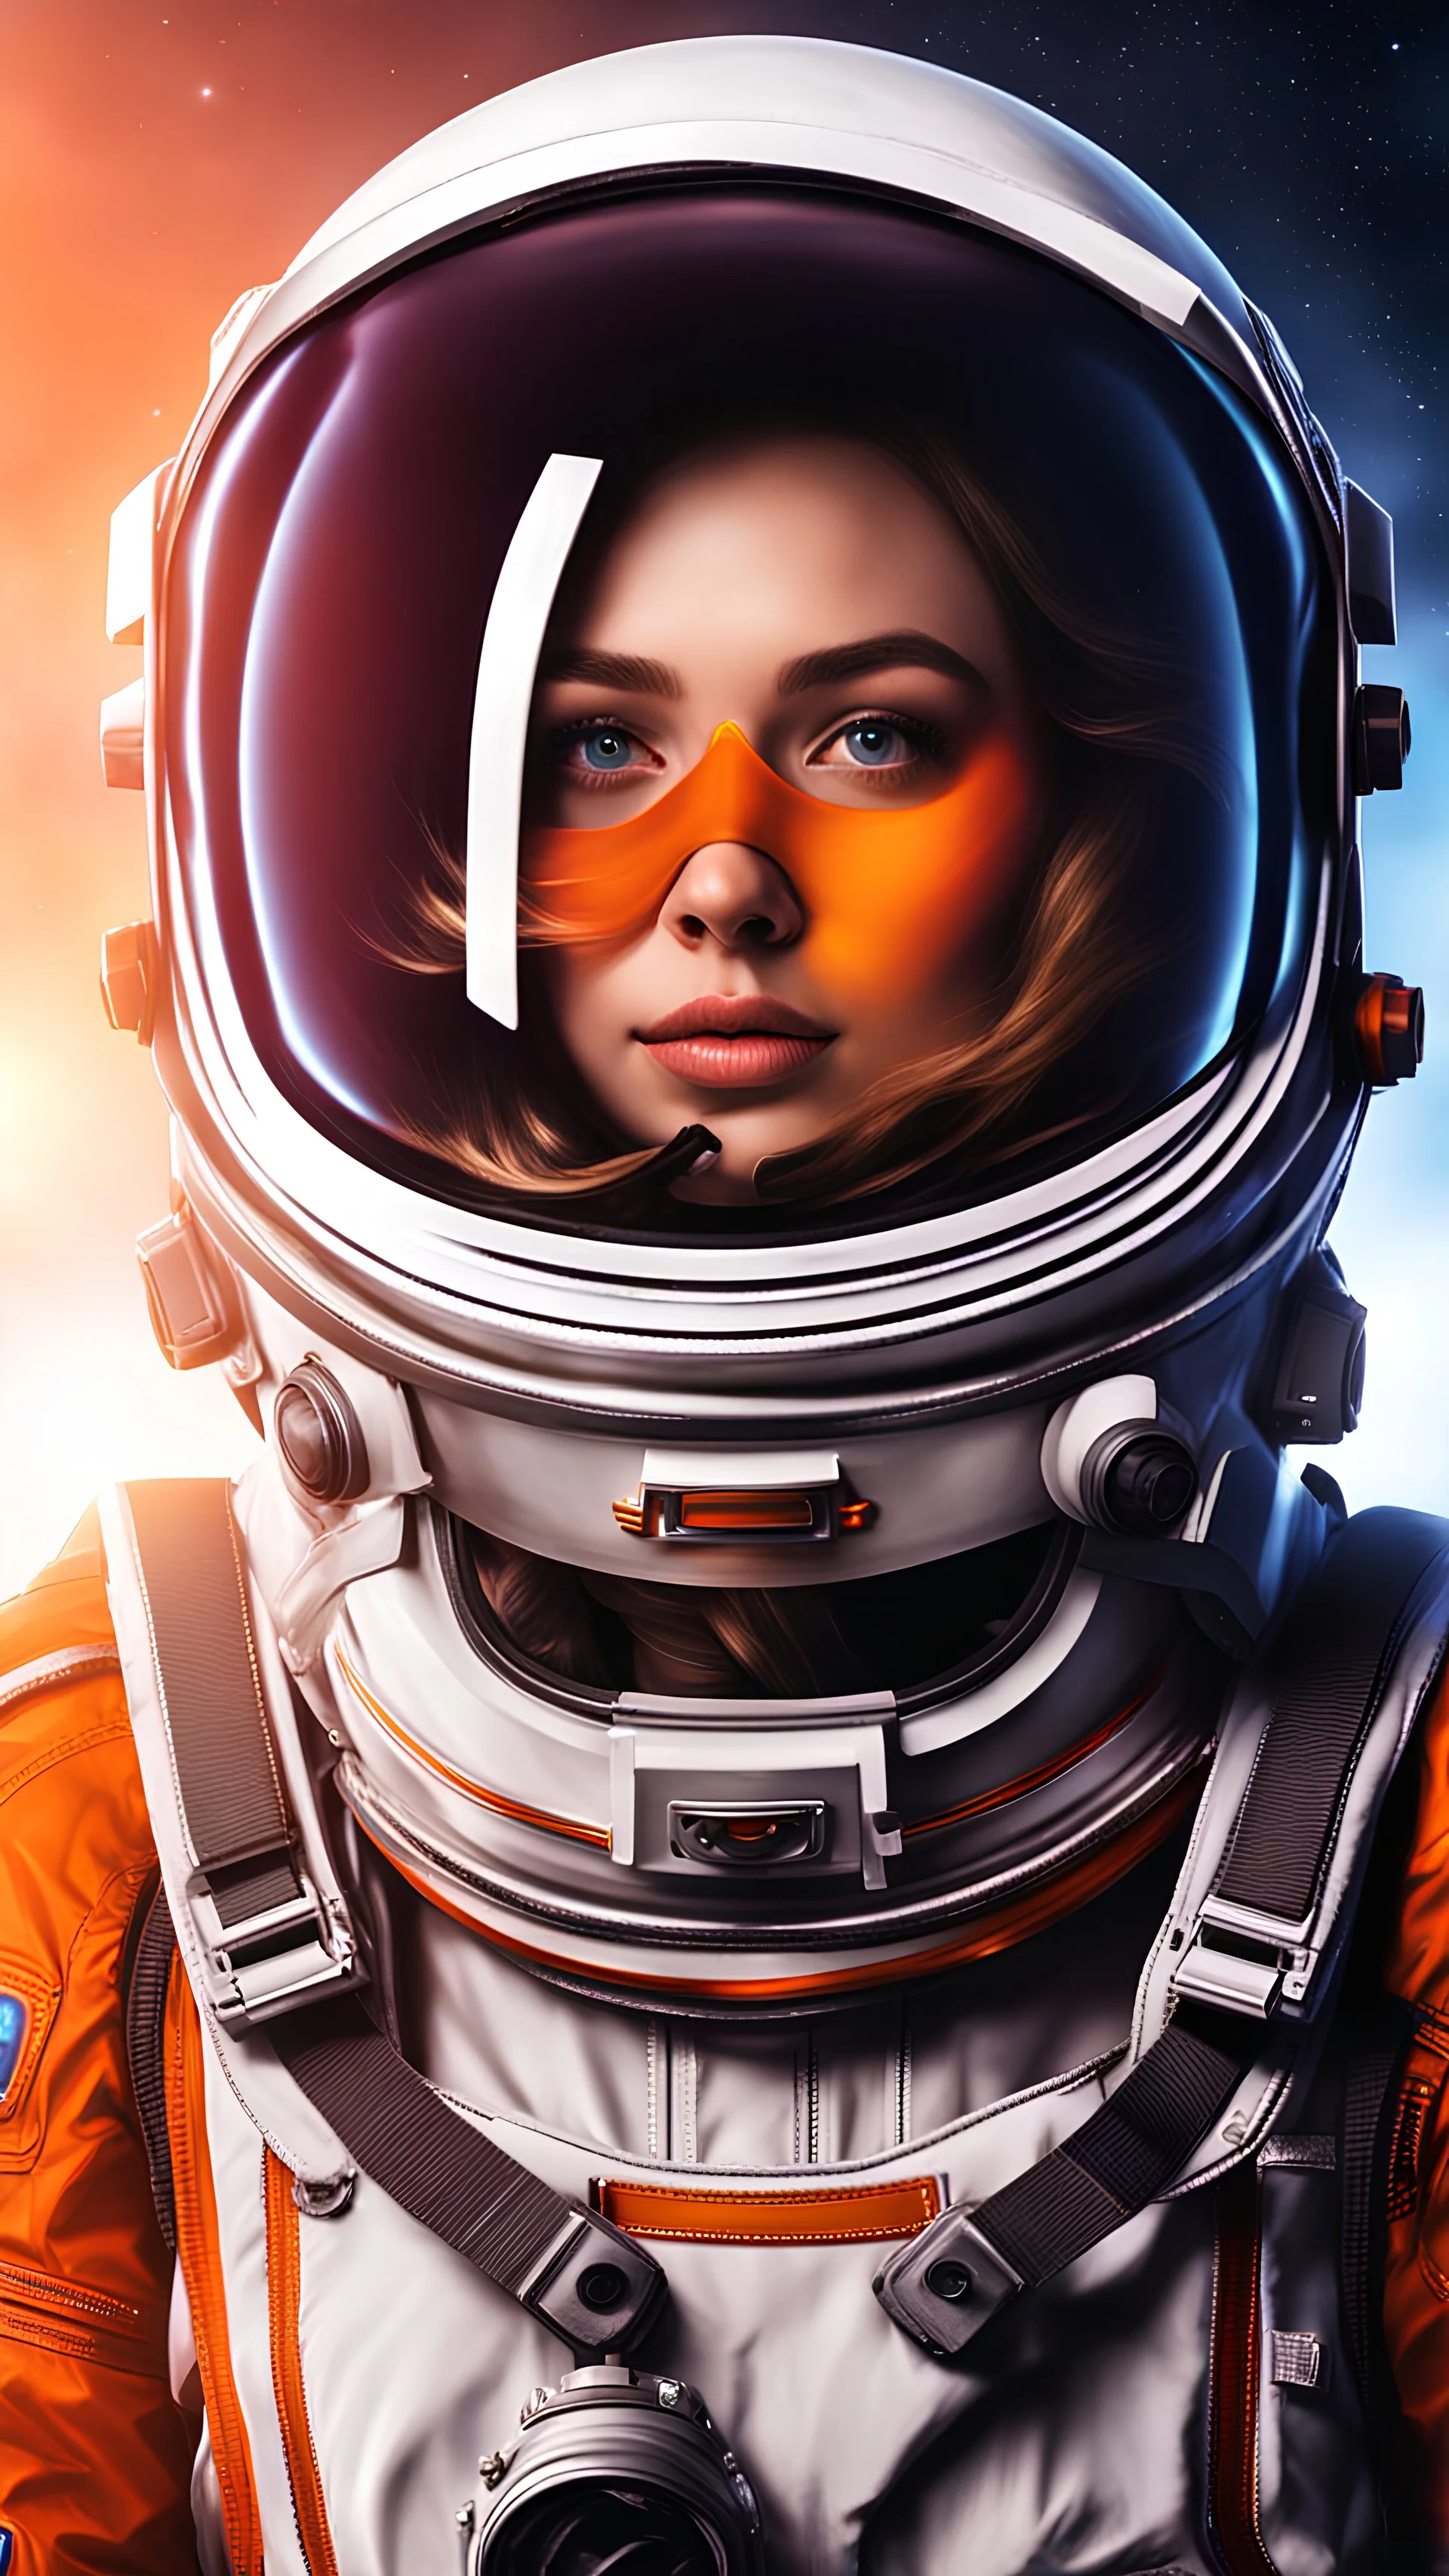 photo realistic of pretty girl astronaut wearing sufficient simple unique mask 70 percent mask of glass and the rest made of chromium metal one layer, color #edb00e, to see outside view of a planet some reflected, smooth mask no buttons nor gadgets, color gradient astronaut mask orange color, enhanced exposure lights, surprised with landscape emotional look delicate athletic body, futuristic appealing intricate meticulously detailed, volumetric lighting, 250 megapixels 8K resolution